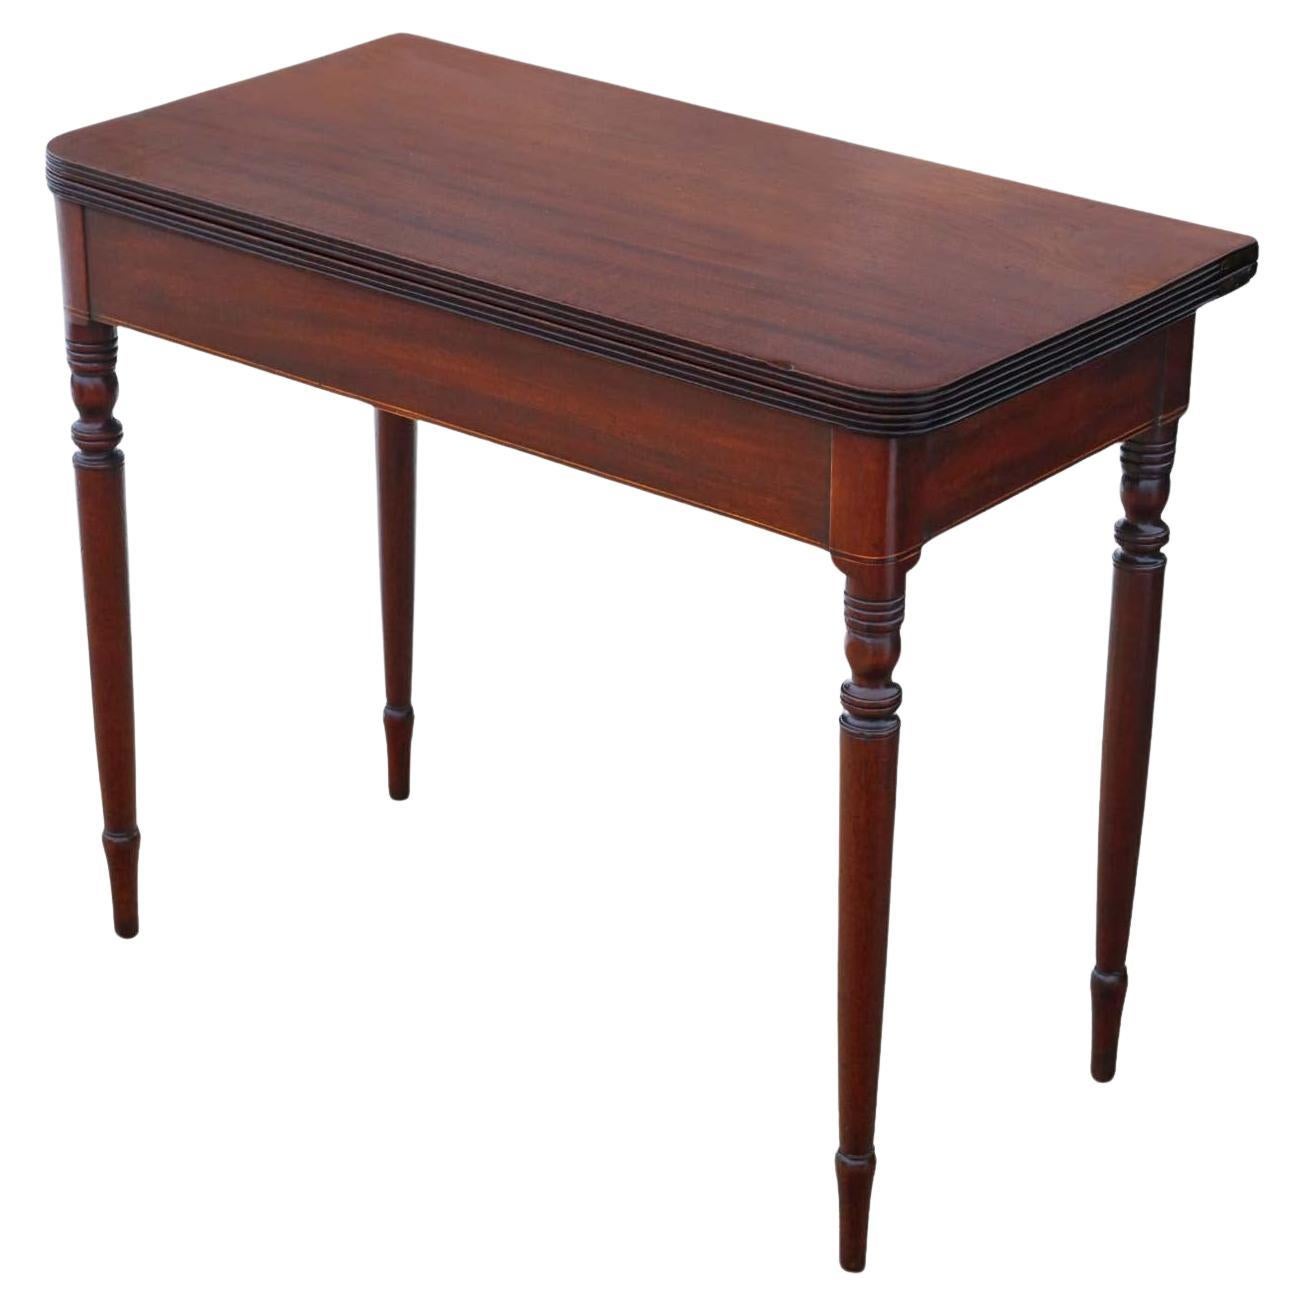 Antique Fine Quality C1800 Inlaid Mahogany Folding Card or Tea Table - Side For Sale